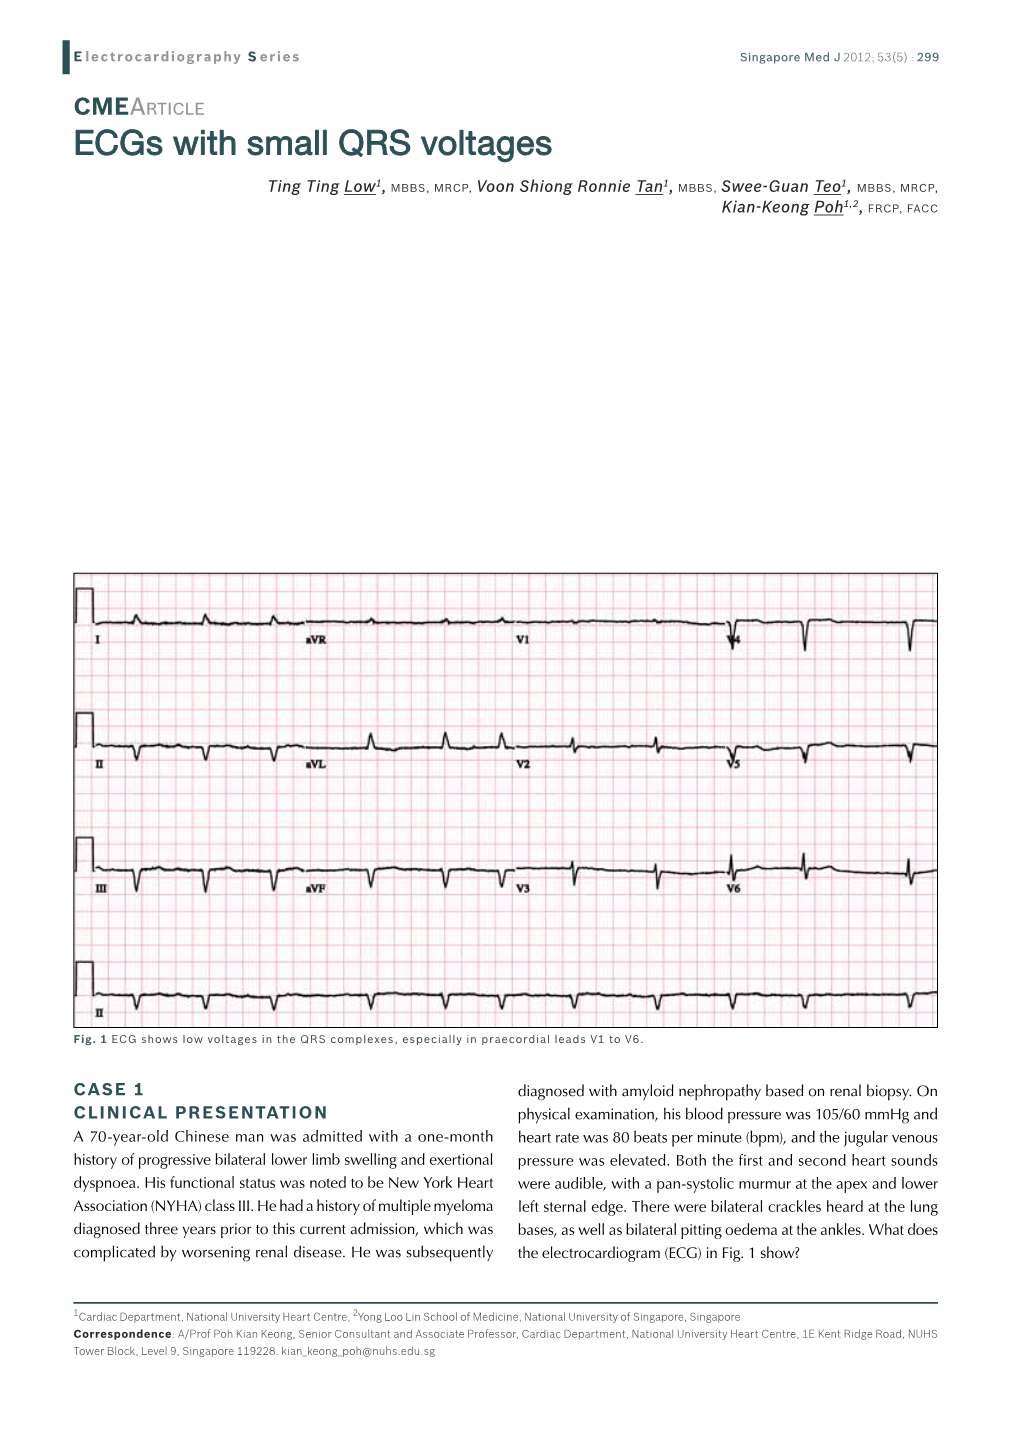 Ecgs with Small QRS Voltages